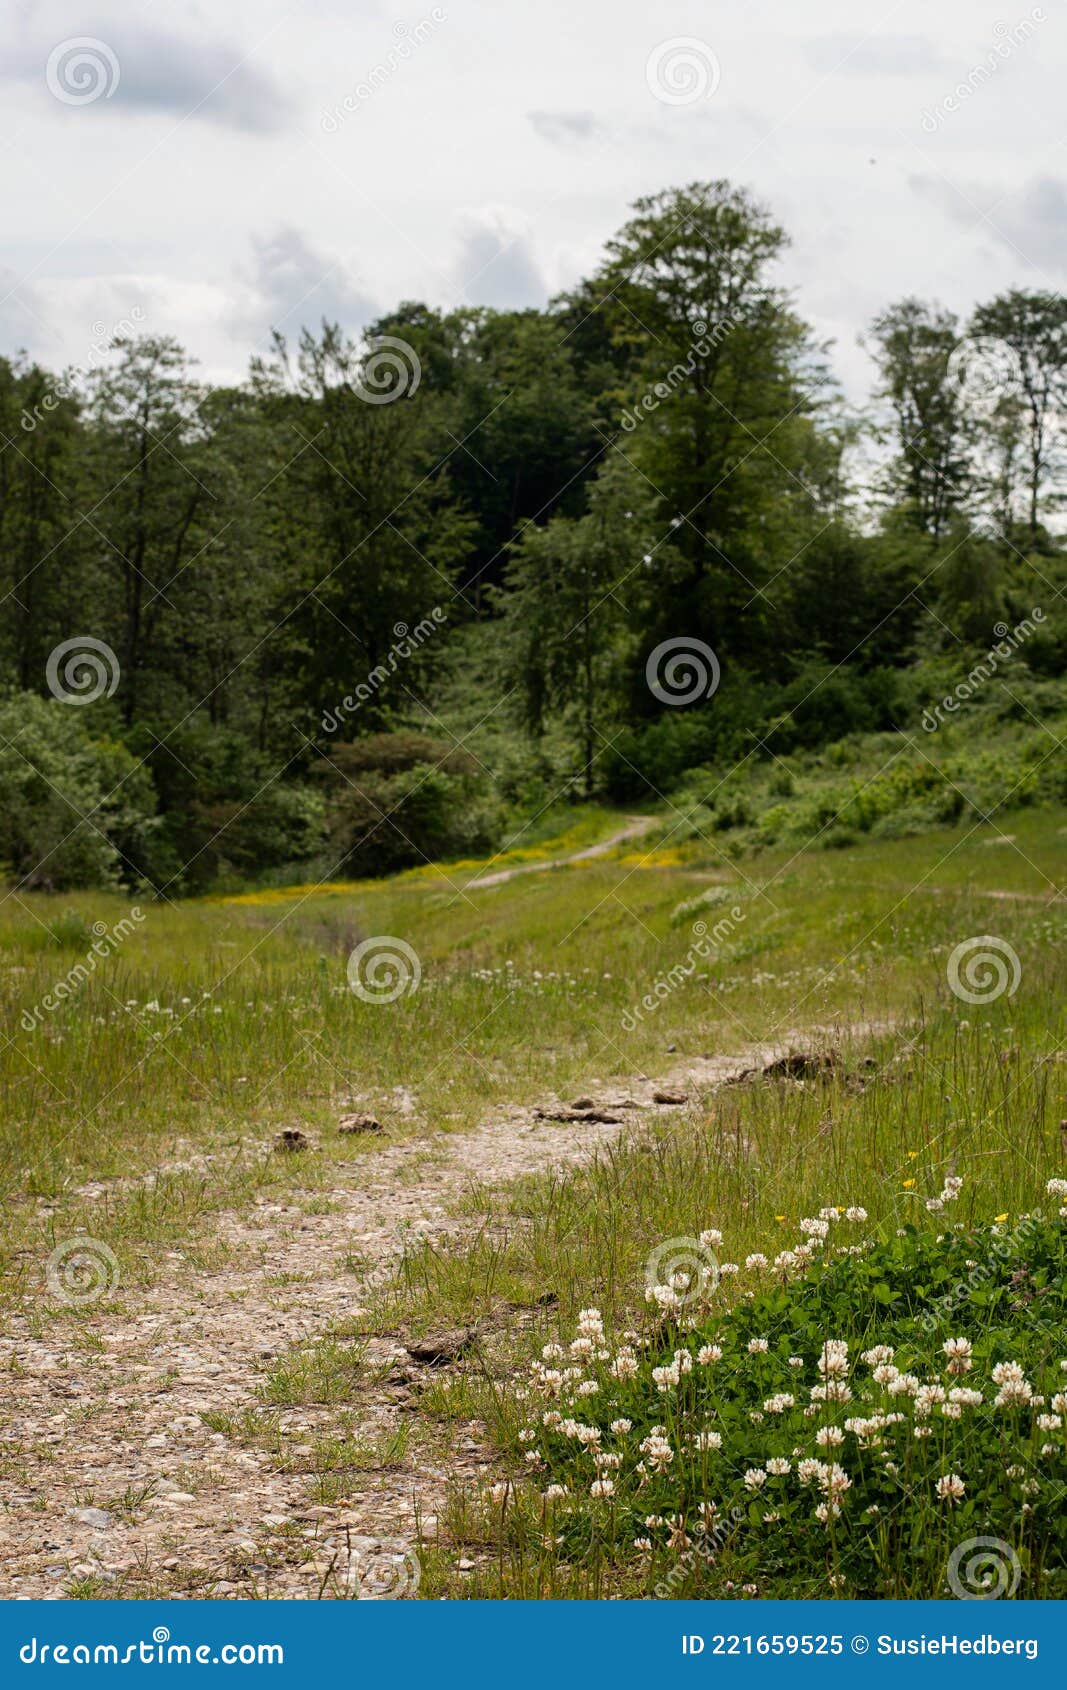 Meadow in Danish Nature on Day Stock Image - of denmark, tourism: 221659525